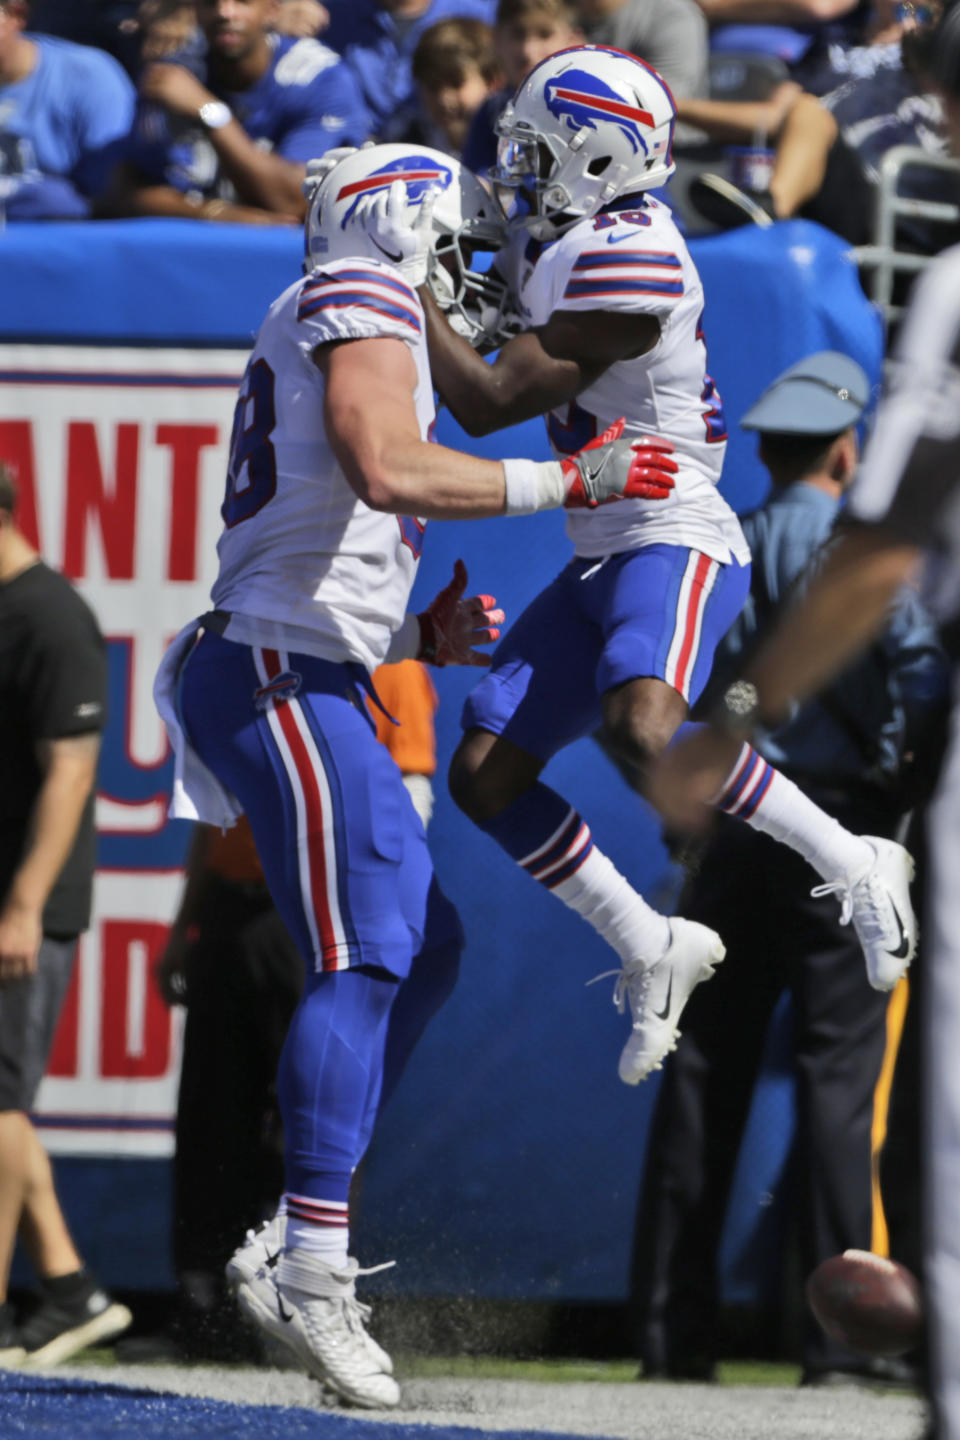 Buffalo Bills' Isaiah McKenzie, right, celebrates his touchdown with Dawson Knox during the first half of an NFL football game against the New York Giants, Sunday, Sept. 15, 2019, in East Rutherford, N.J. (AP Photo/Adam Hunger)